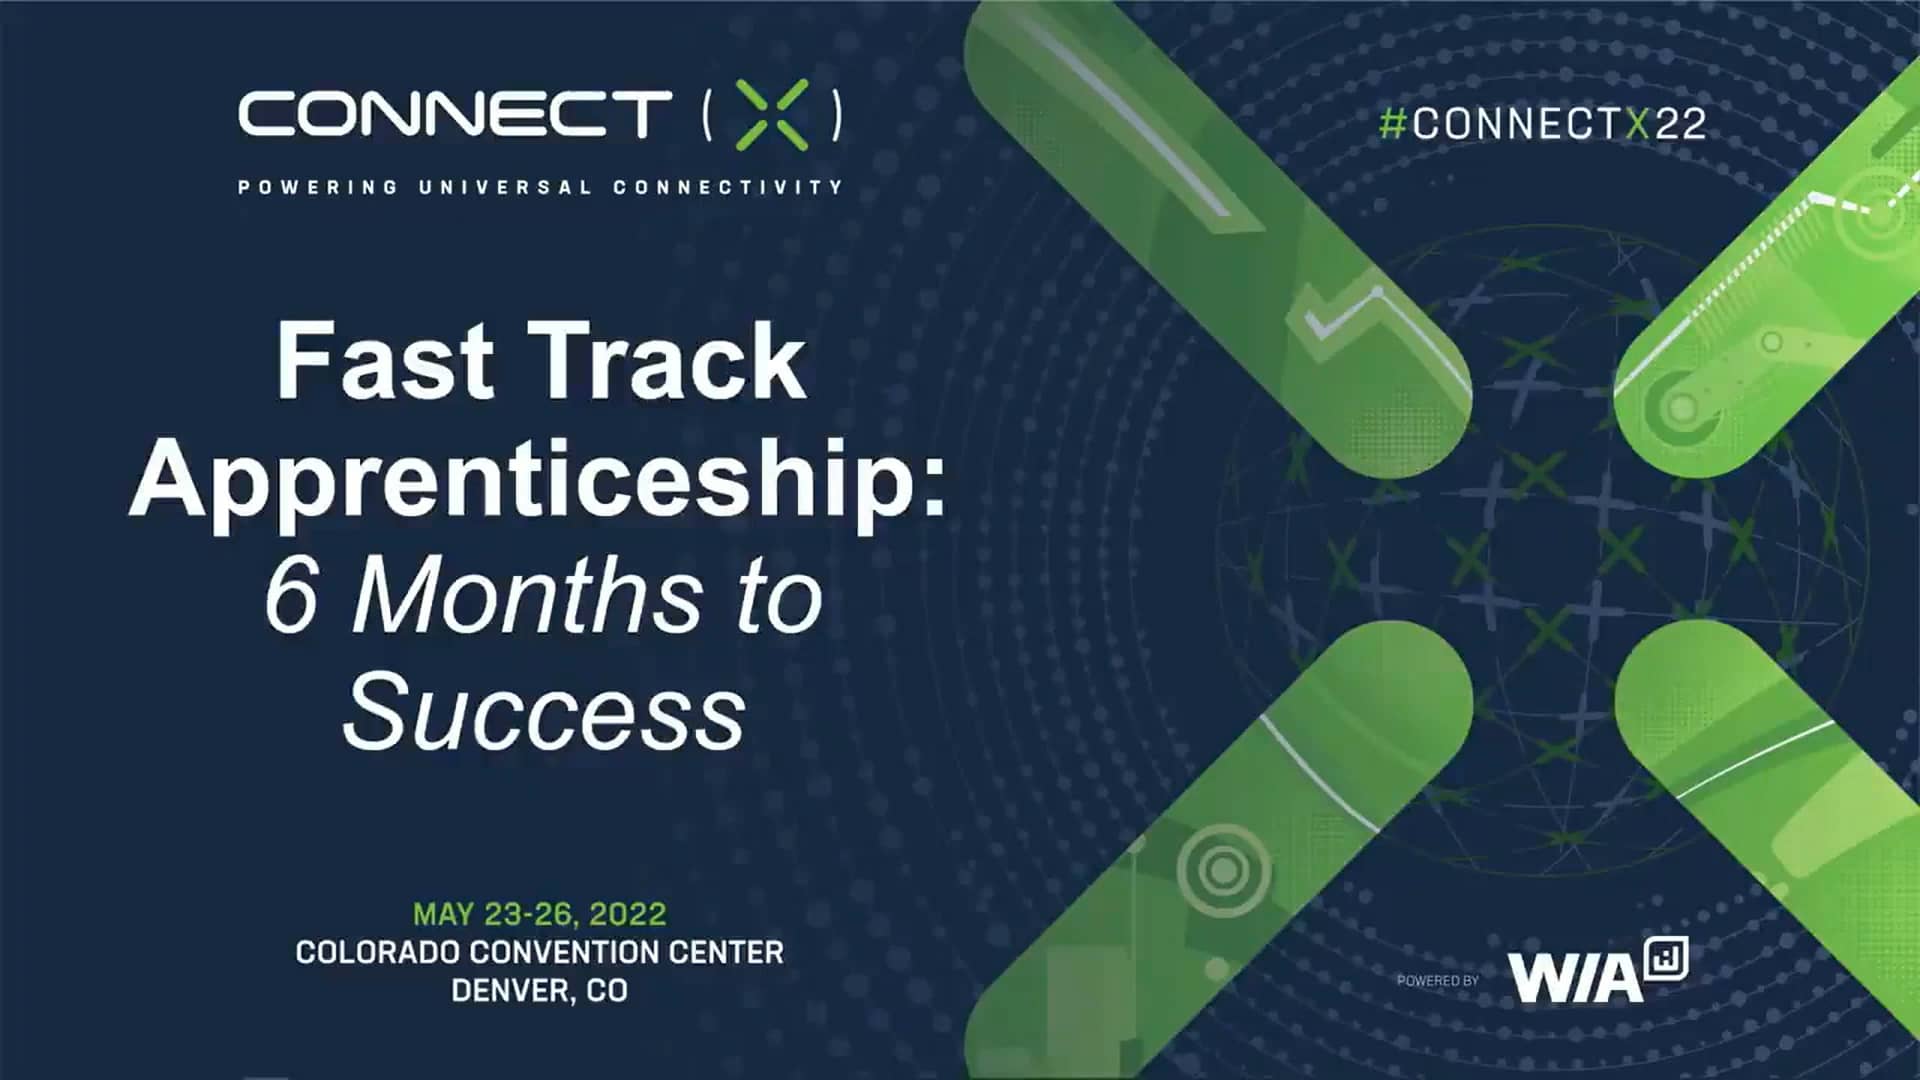 Connect (X) Conference – Fast Track to Apprenticeship: 6 Months to Success